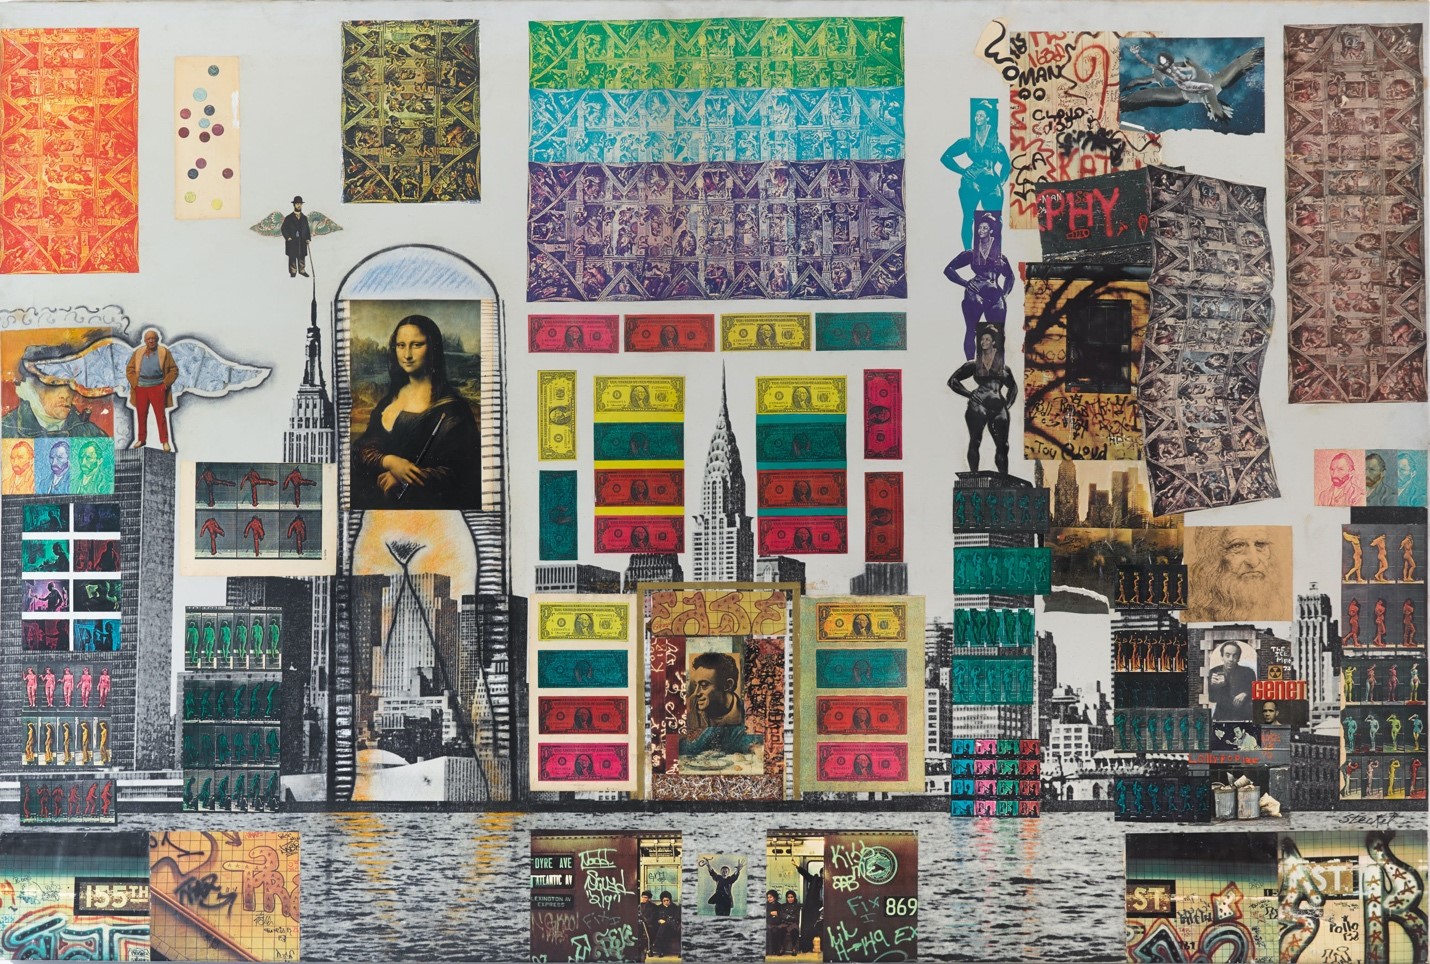 Colorful collage featuring multiple recognizable images: The Mona Lisa, the Empire State Building, dollar bills, and more.